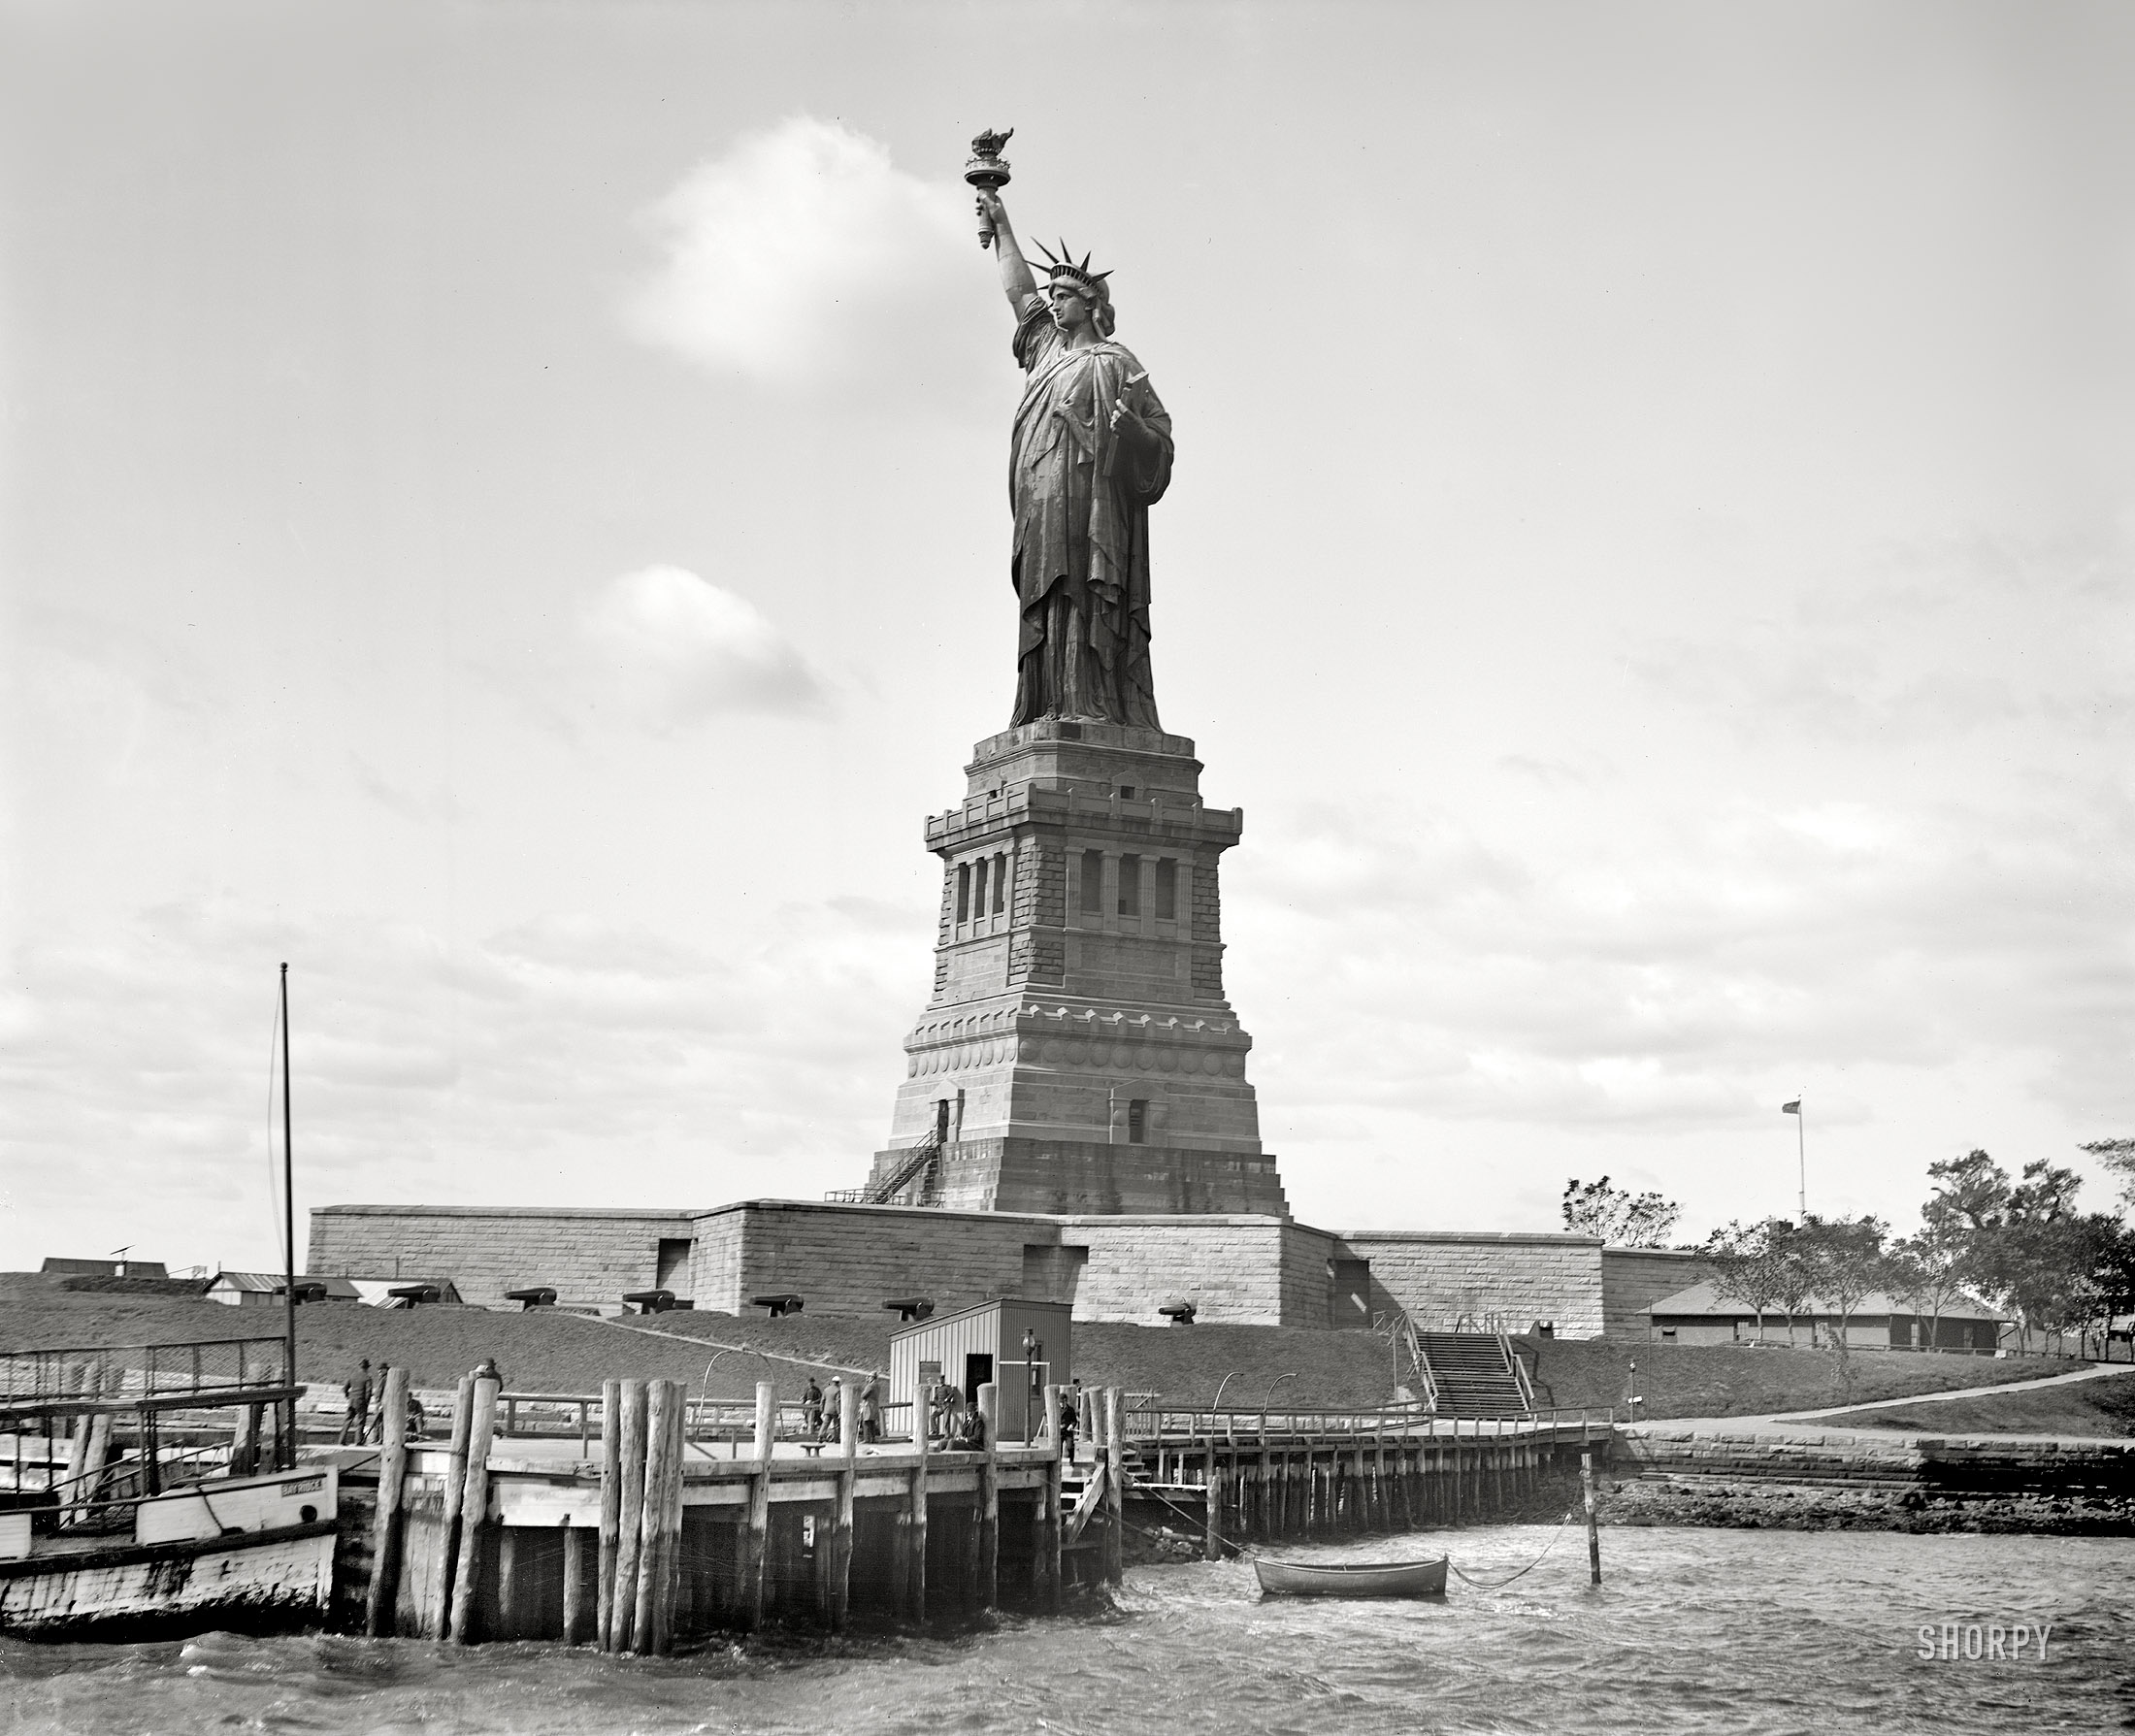 New York Harbor circa 1905. "Statue of Liberty (profile)." 8x10 inch dry plate glass negative, Detroit Publishing Company. View full size.